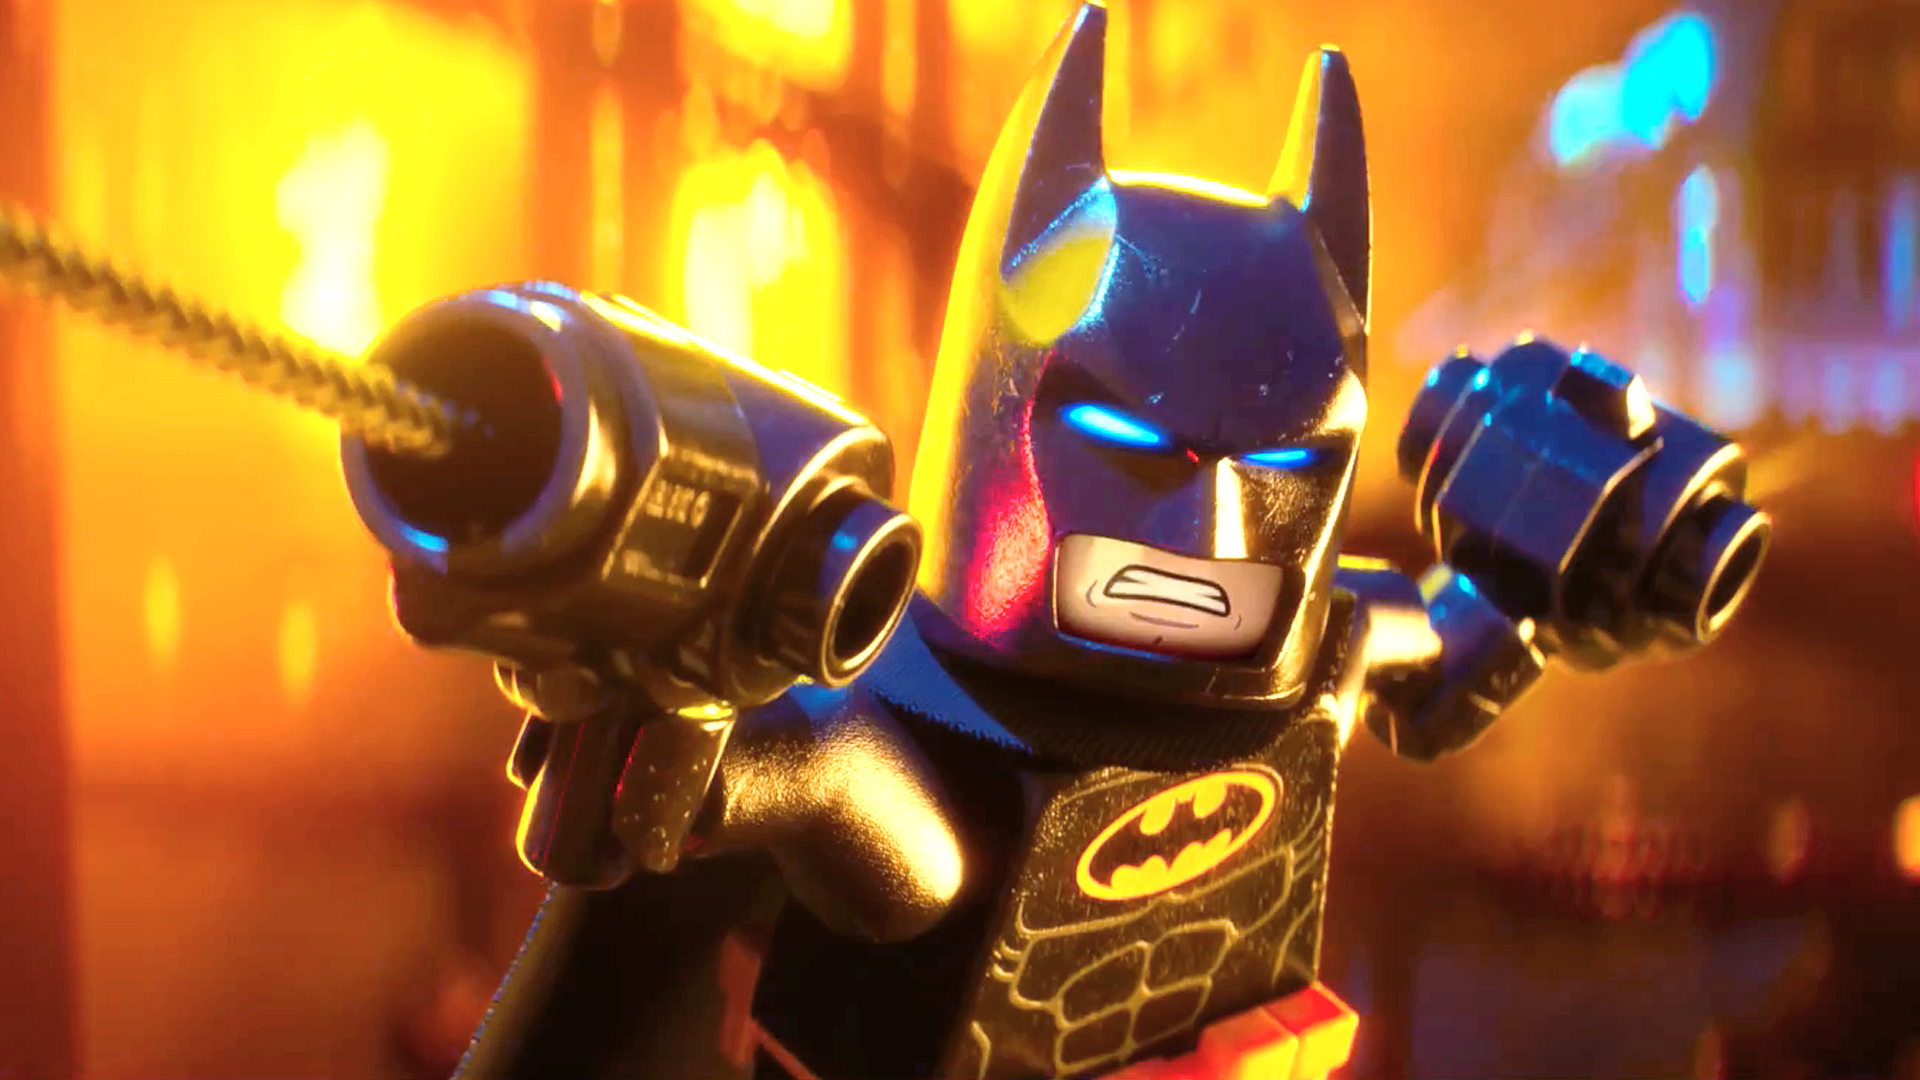 The Lego Batman Movie DVD & Blu-ray review: The best Batman movie? -  SciFiNow - Science Fiction, Fantasy and Horror